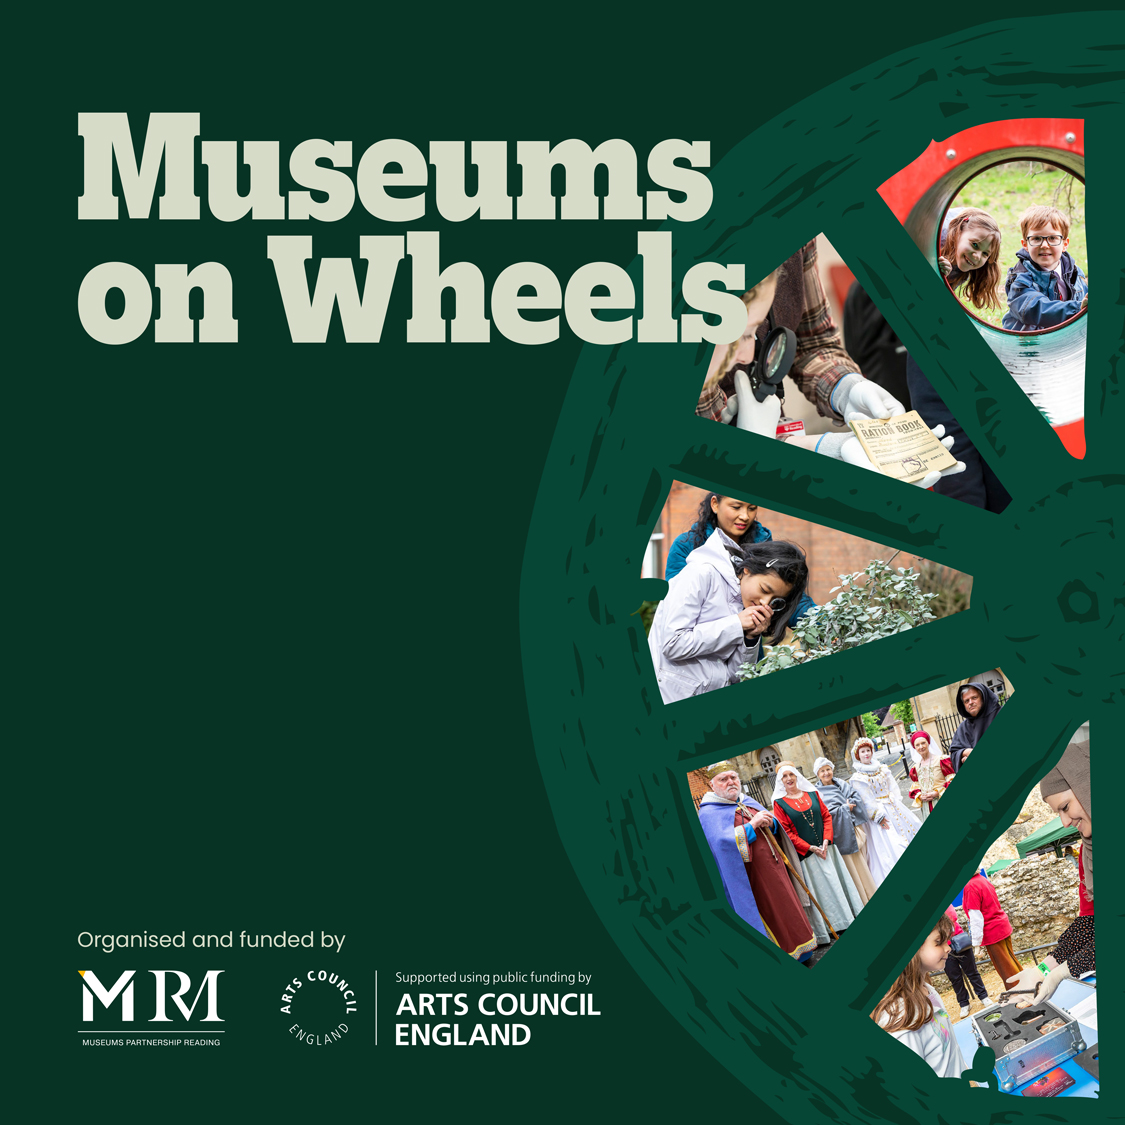 Museums on Wheels (that's us and @readingmuseum) will be rolling up to @UniofReading's Community Festival on May 18! Come for the live music and street food, stay to get up close and personal with our collections. See you there! reading.ac.uk/events/Feed/20…